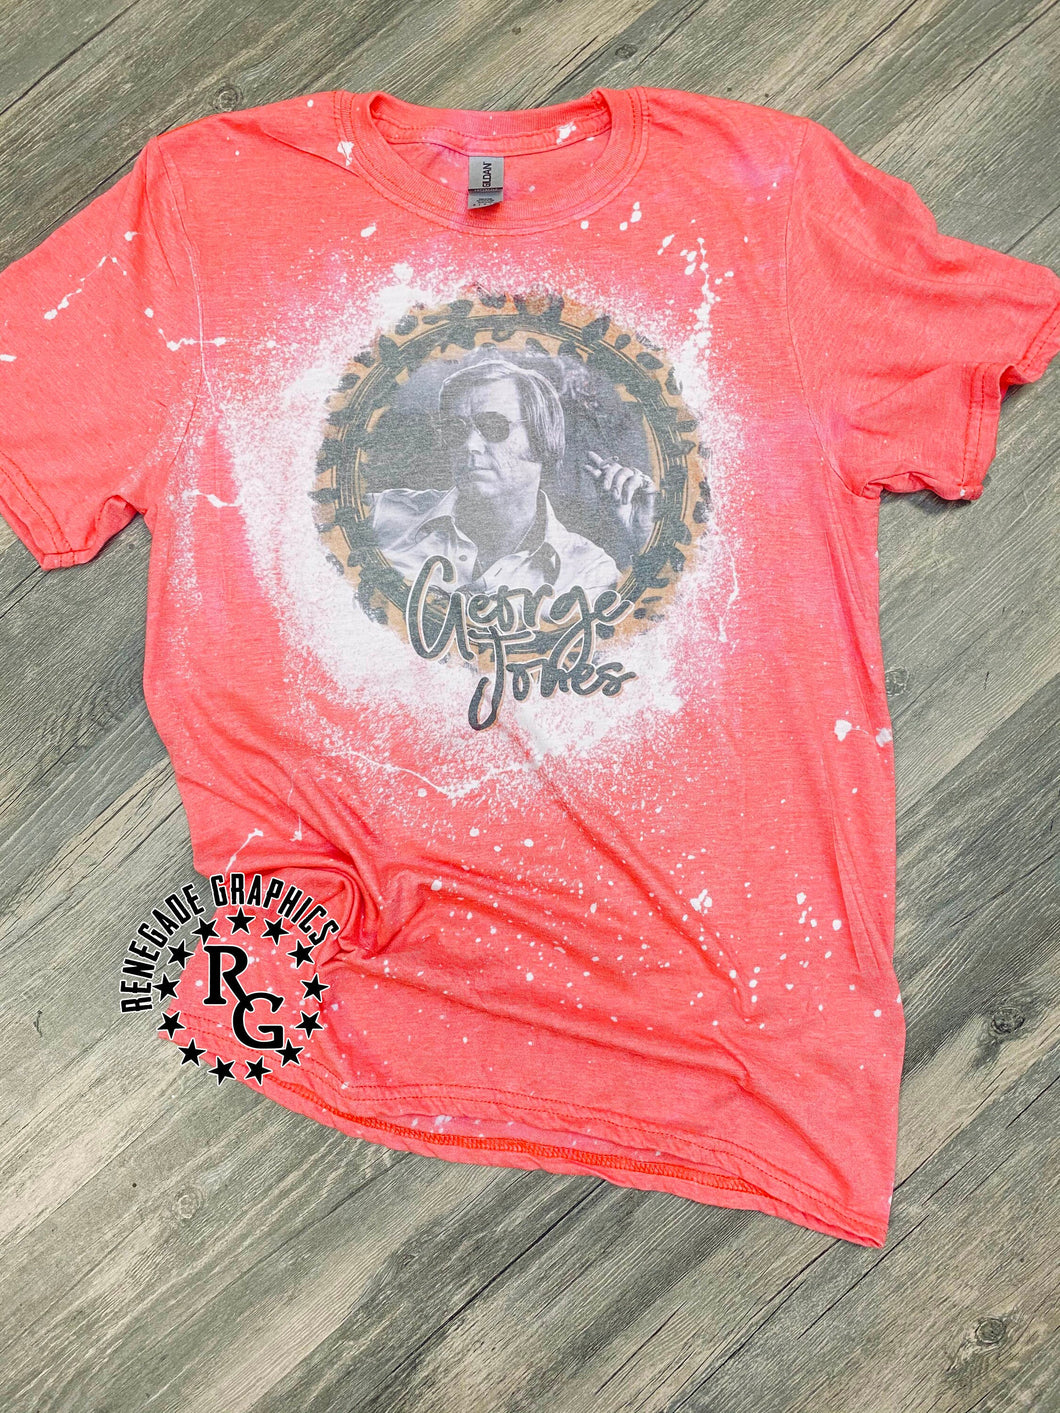 George Jones | Country Music | Legend | Band Tee | Vintage | Bleached Shirt